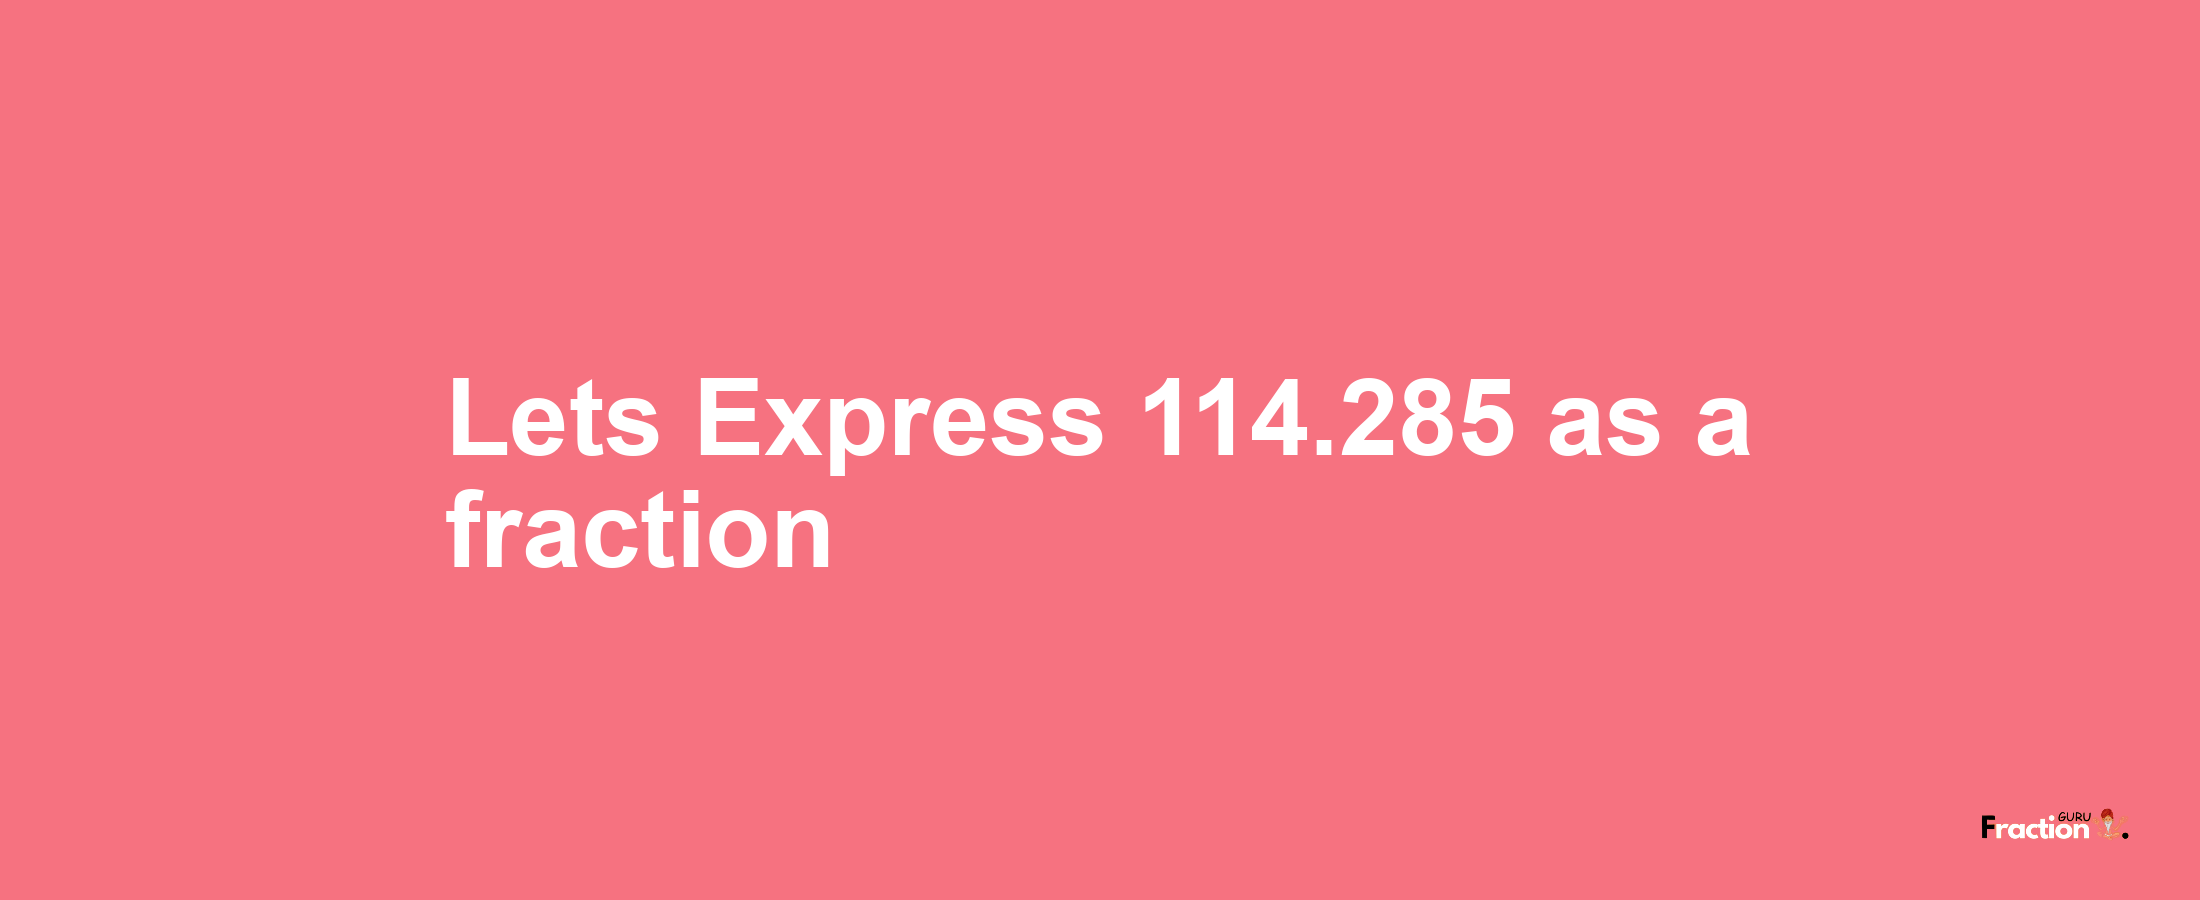 Lets Express 114.285 as afraction